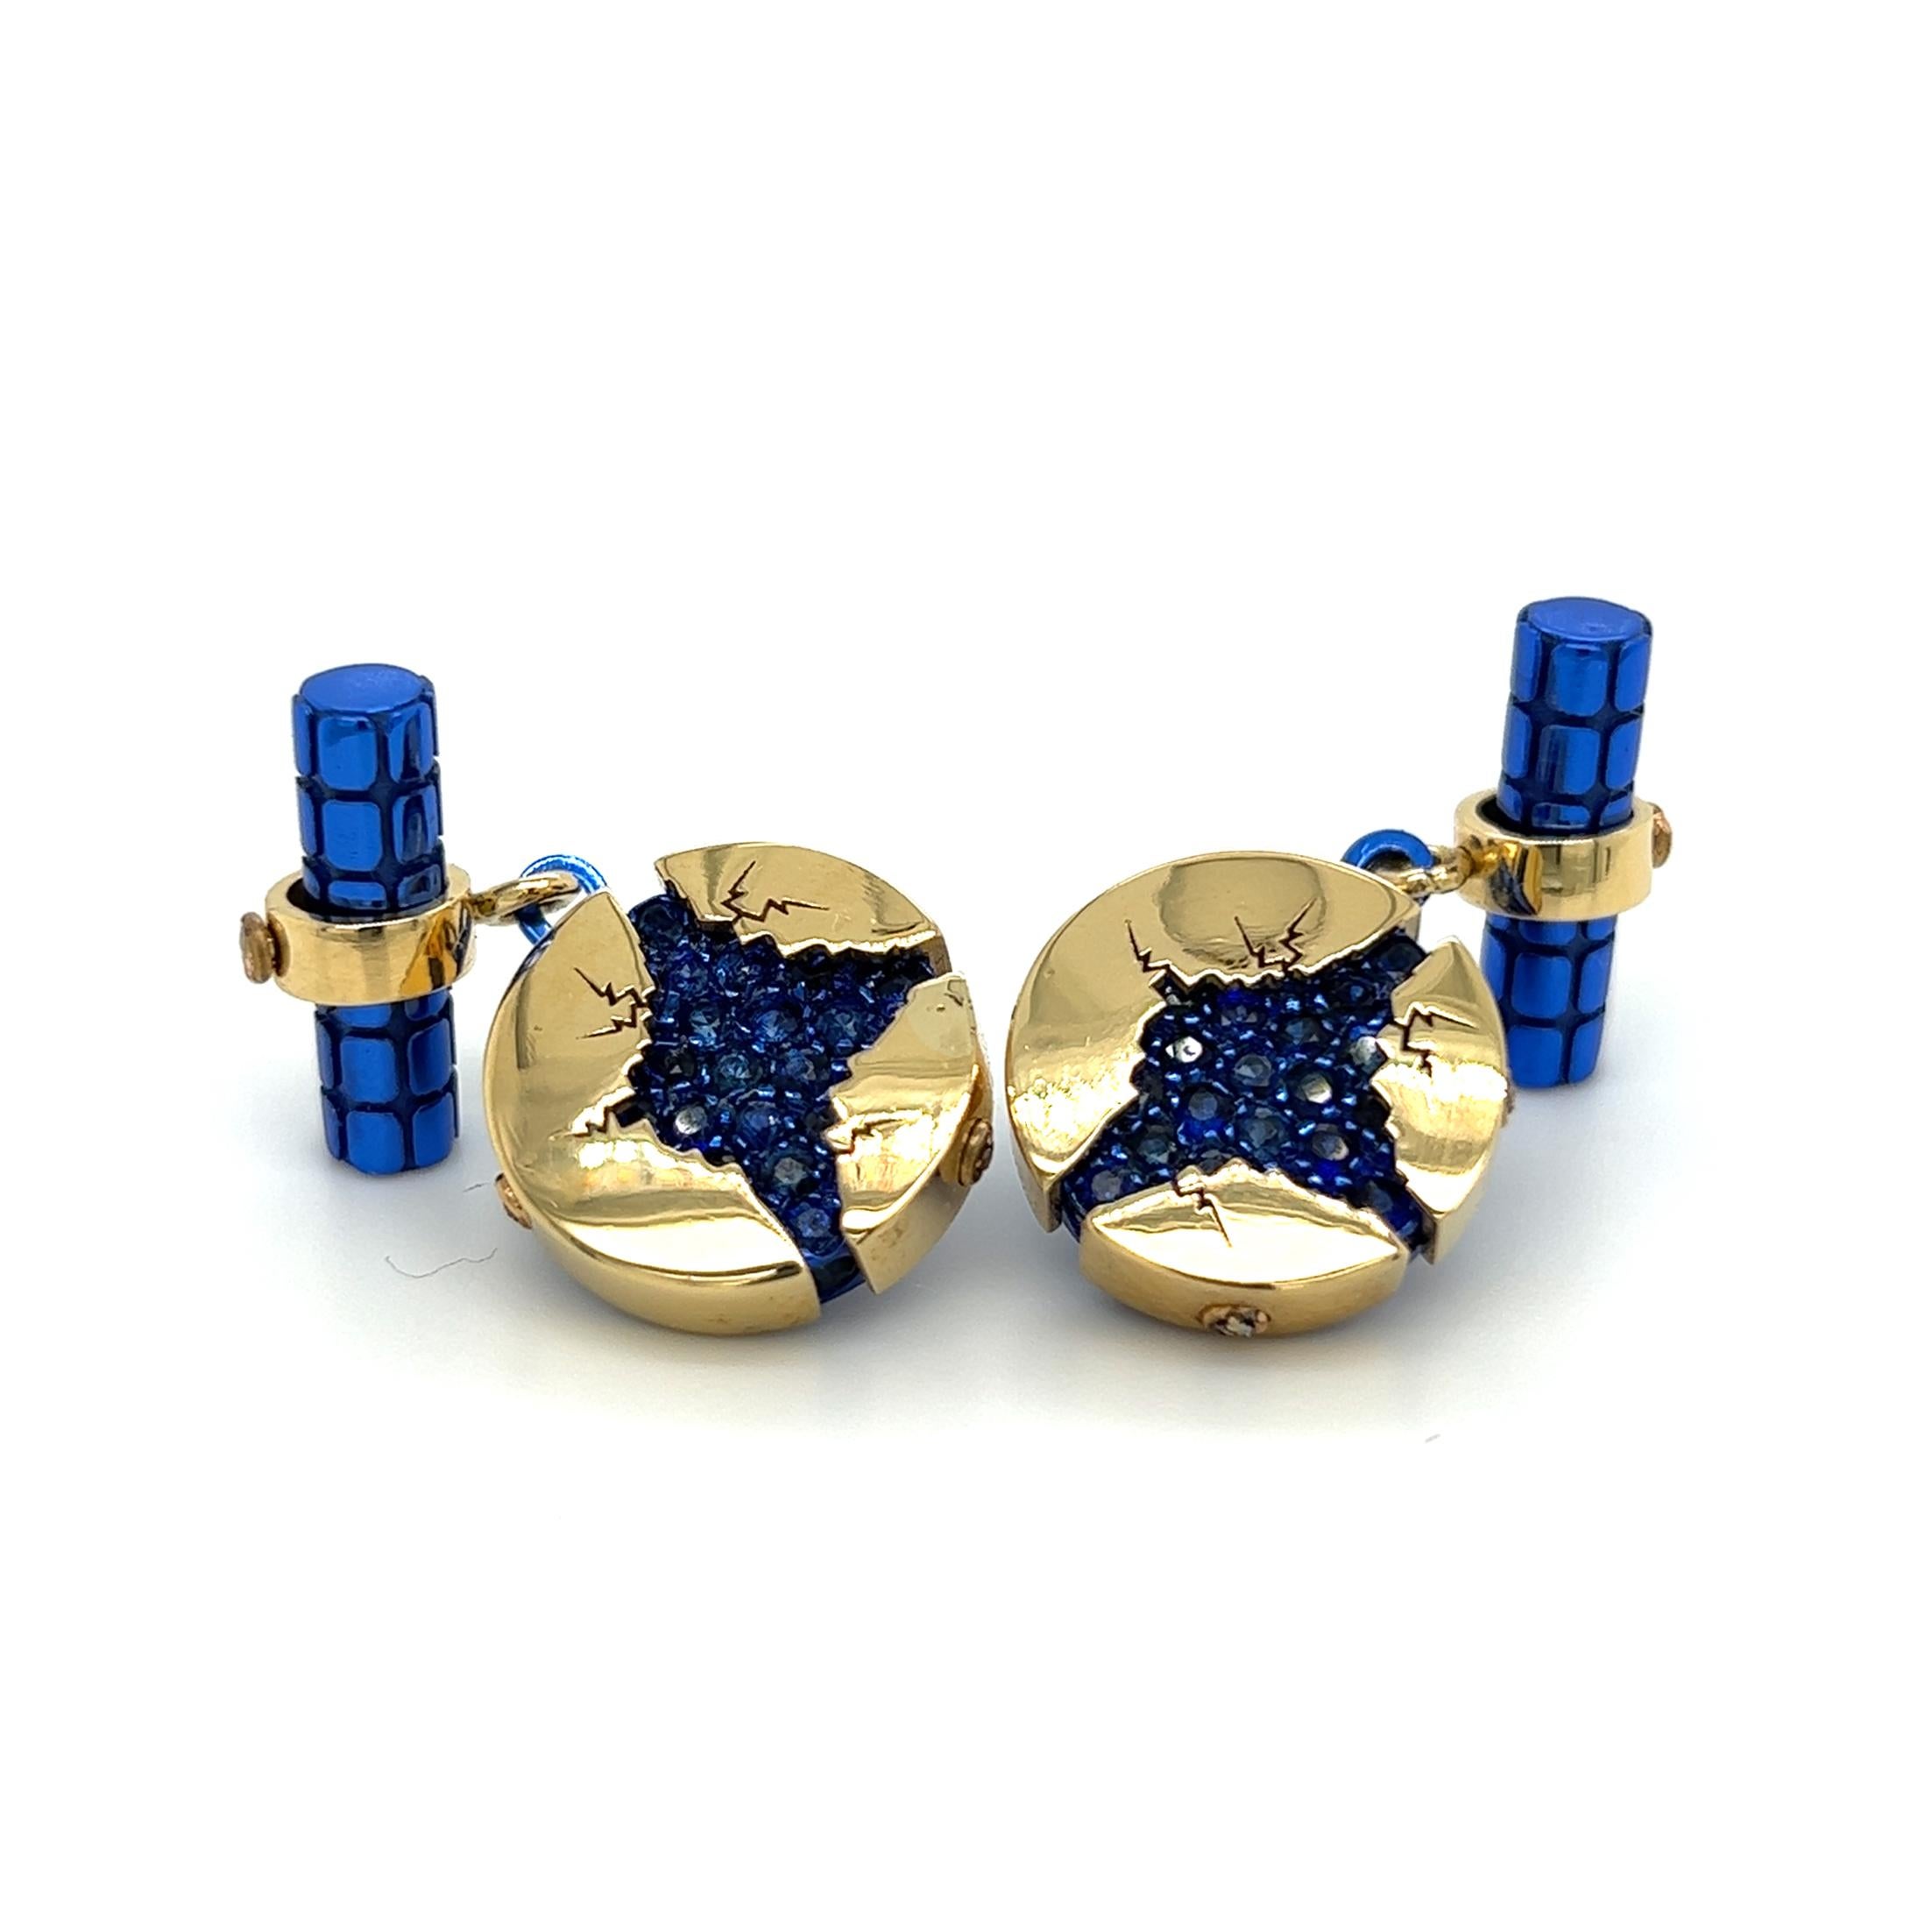 BERCA cufflinks in 18 kt natural and oxidized yellow gold, brilliant blue, 1.25 ct natural blue sapphires. inspired by the sculpture by Arnaldo Pomodoro in Milan, Piazza Meda. 
This jewel is a sign of BERCA's love for its city Milan.
Absolutely